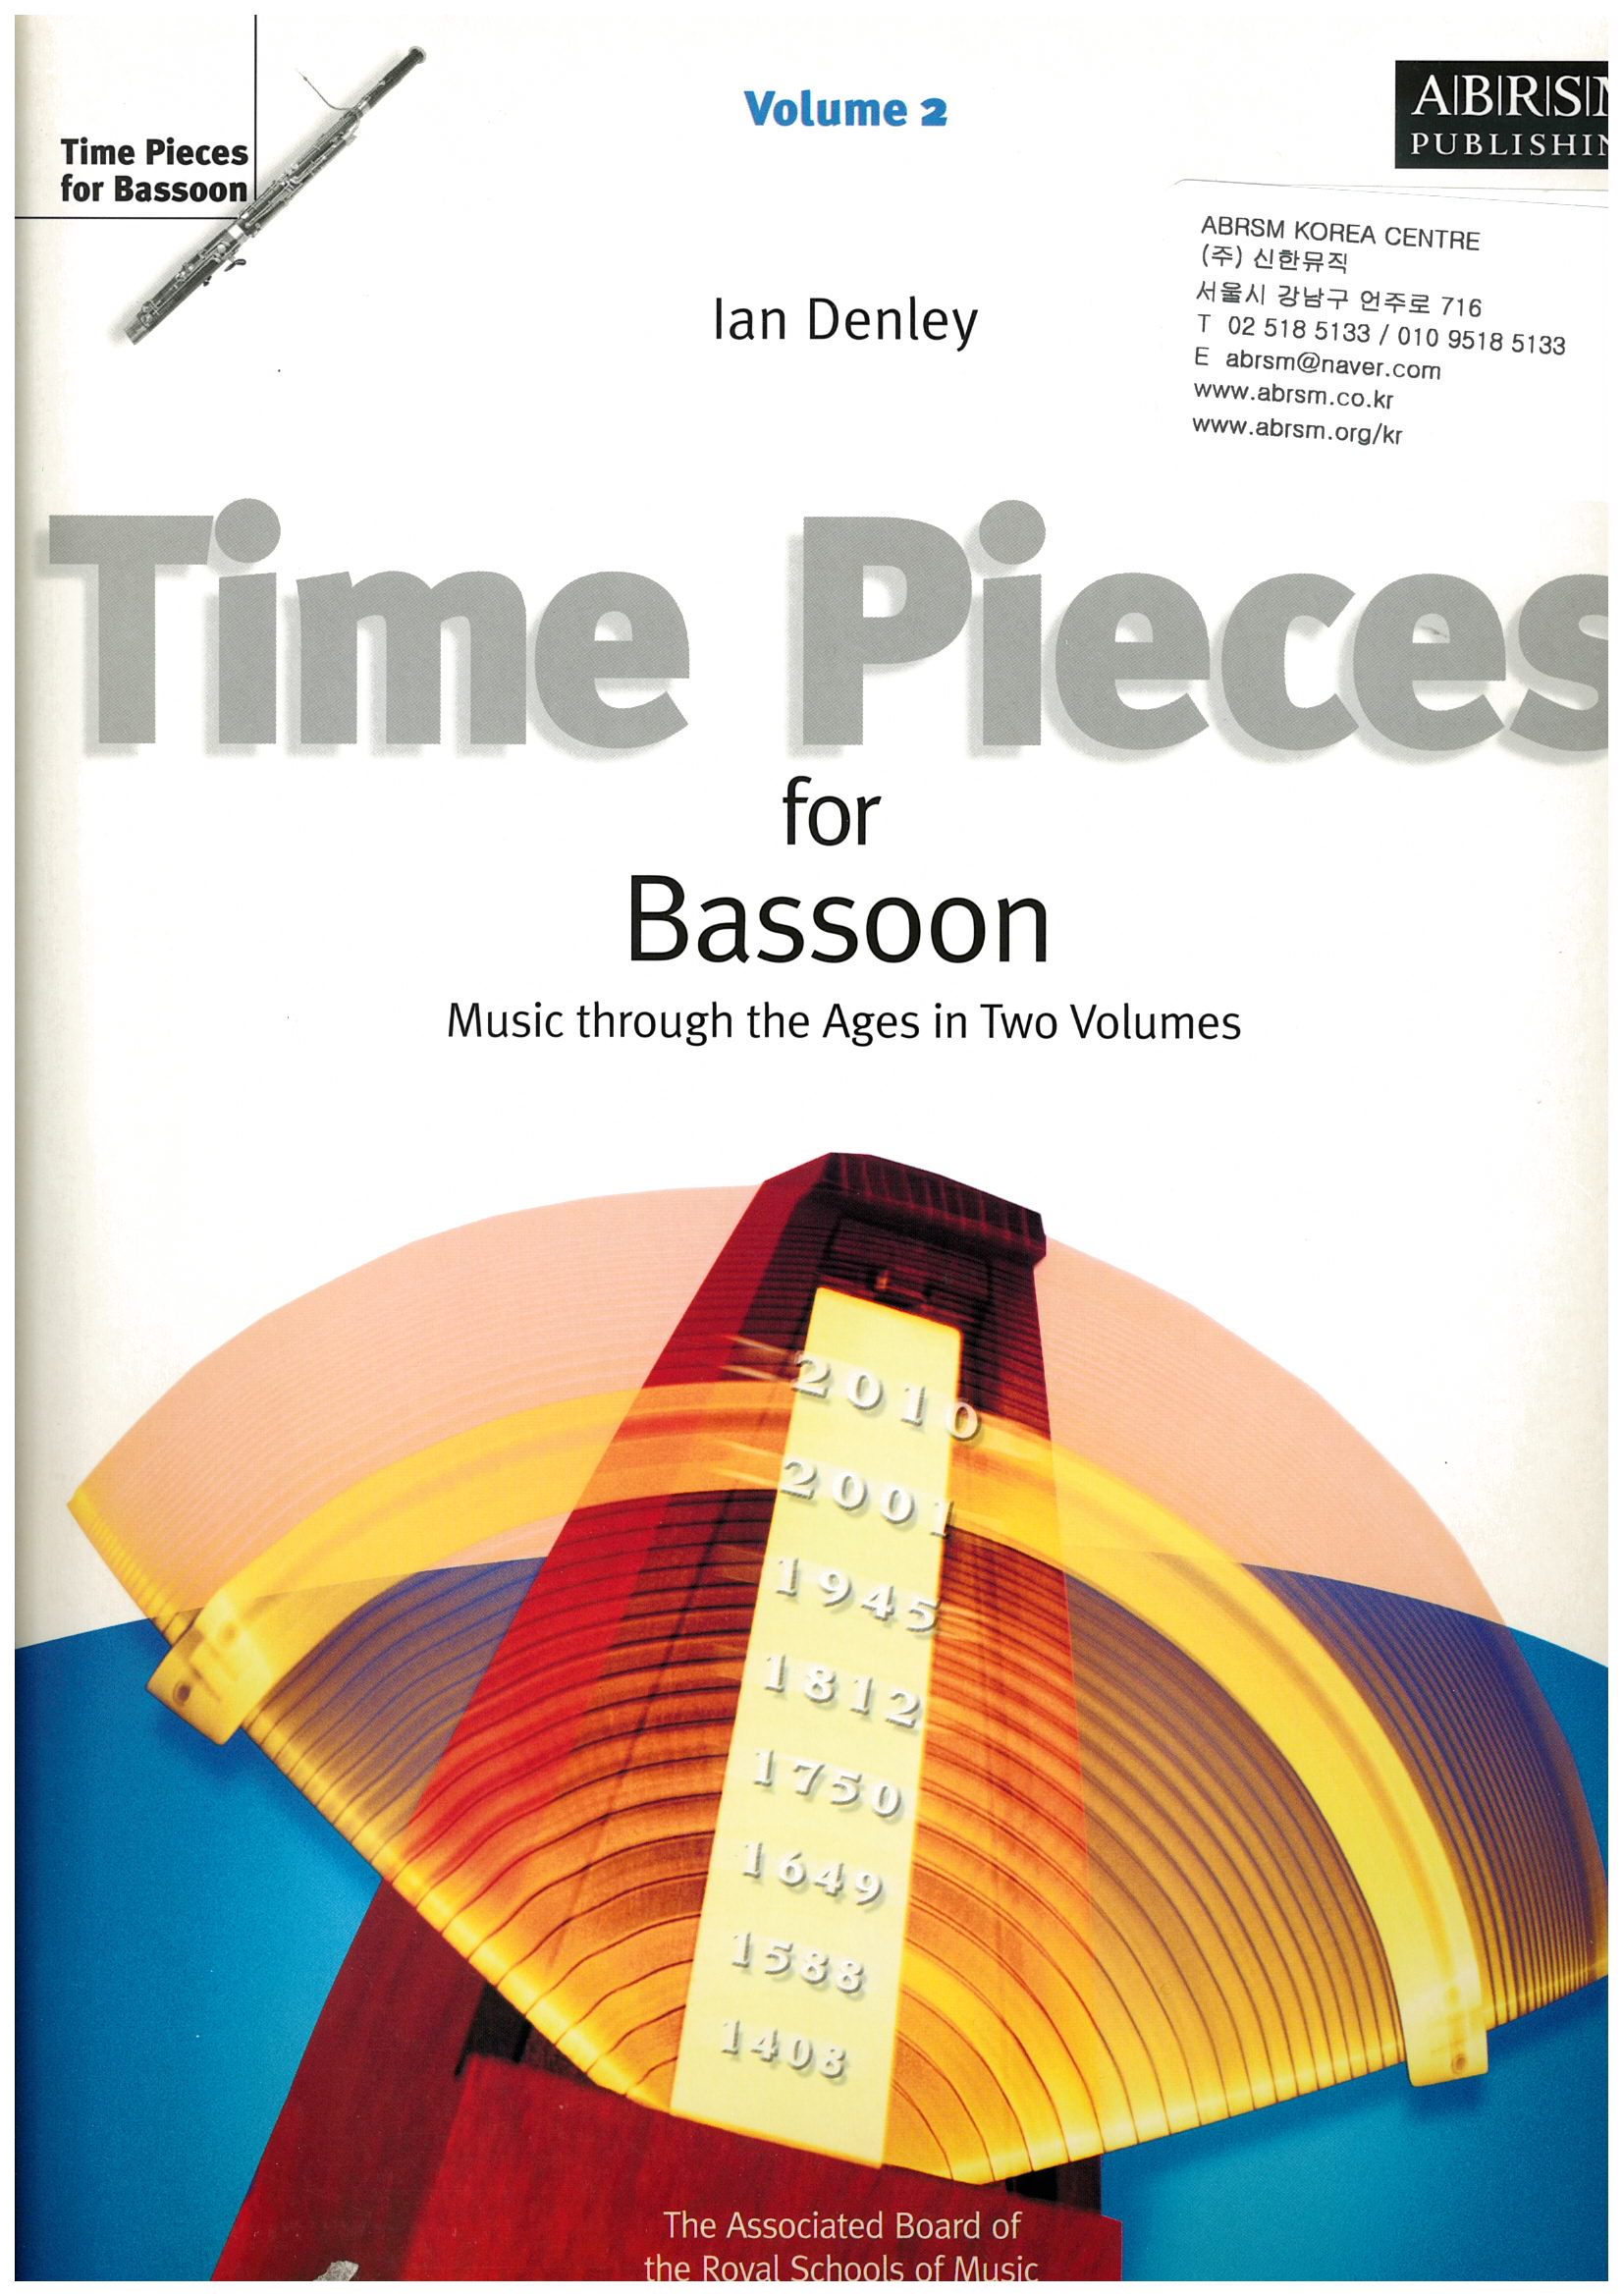 Time Pieces for Bassoon Volume 2 G4-6